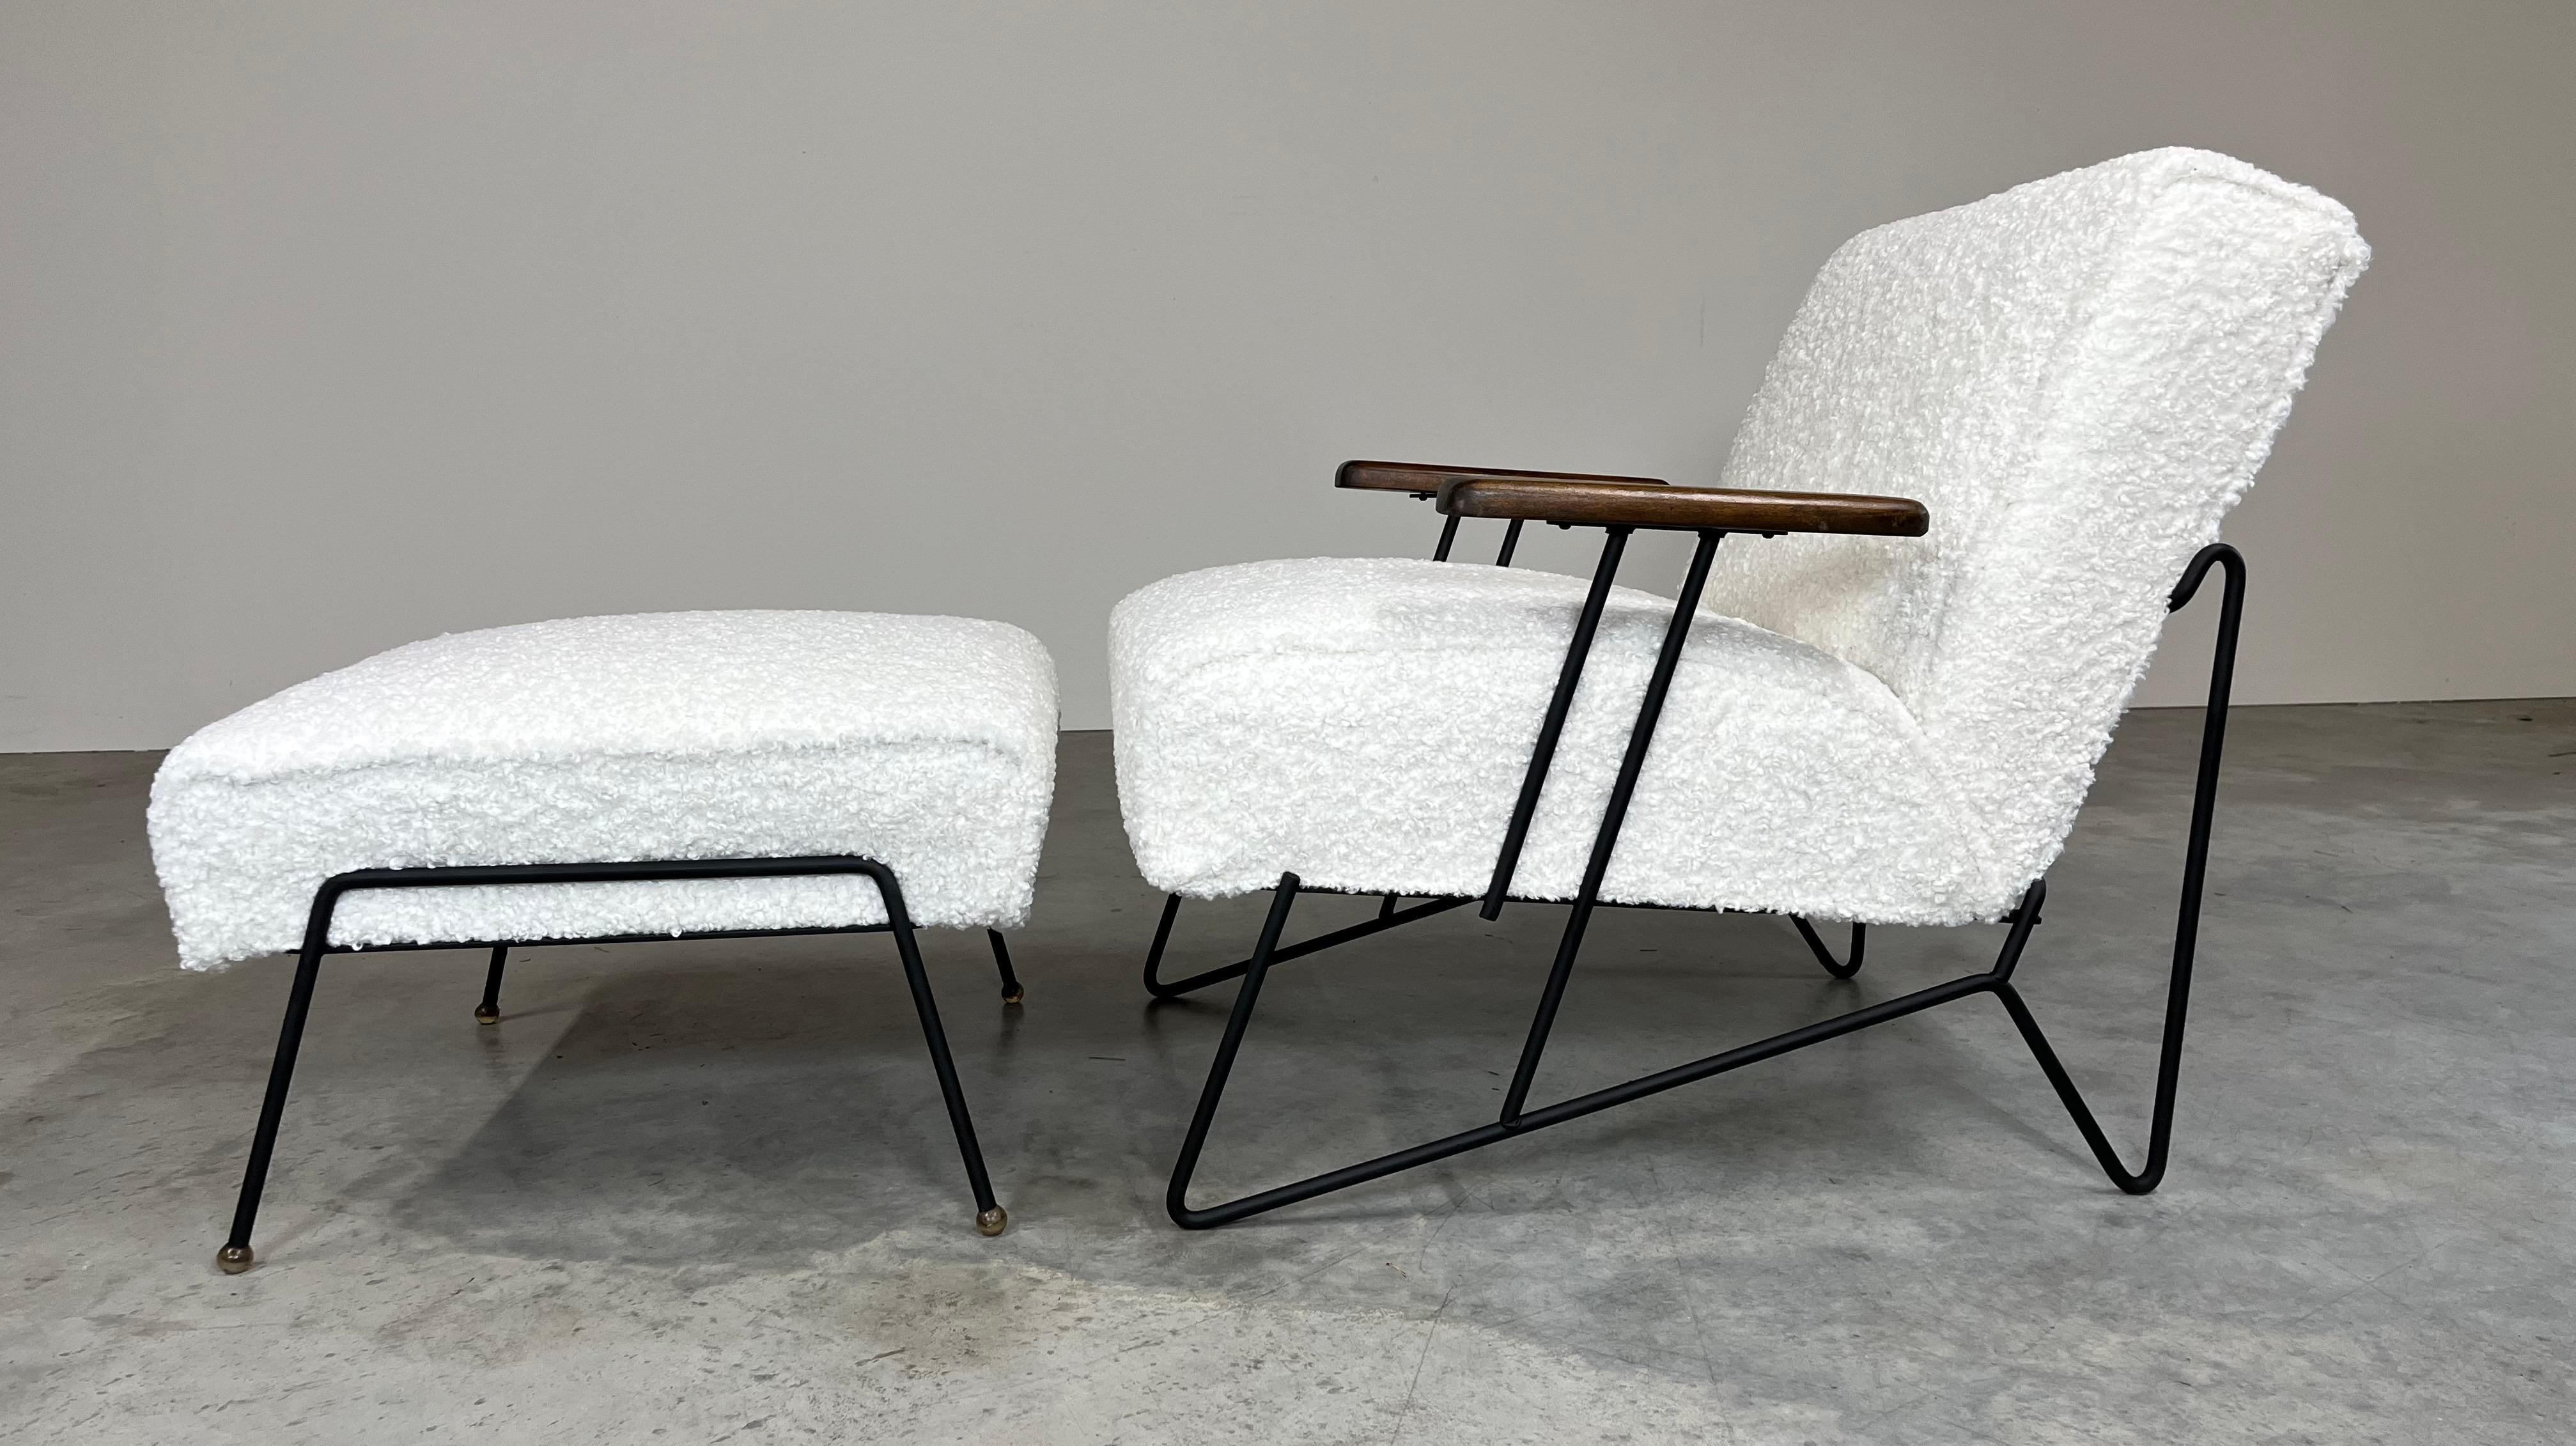 A beautiful mid-century lounge chair & ottoman set having solid black iron frames with mahogany paddle arms newly upholstered in thick boucle’ fabric attributed to Dan Johnson.
North America ca 1950.
In excellent condition throughout. The frames are